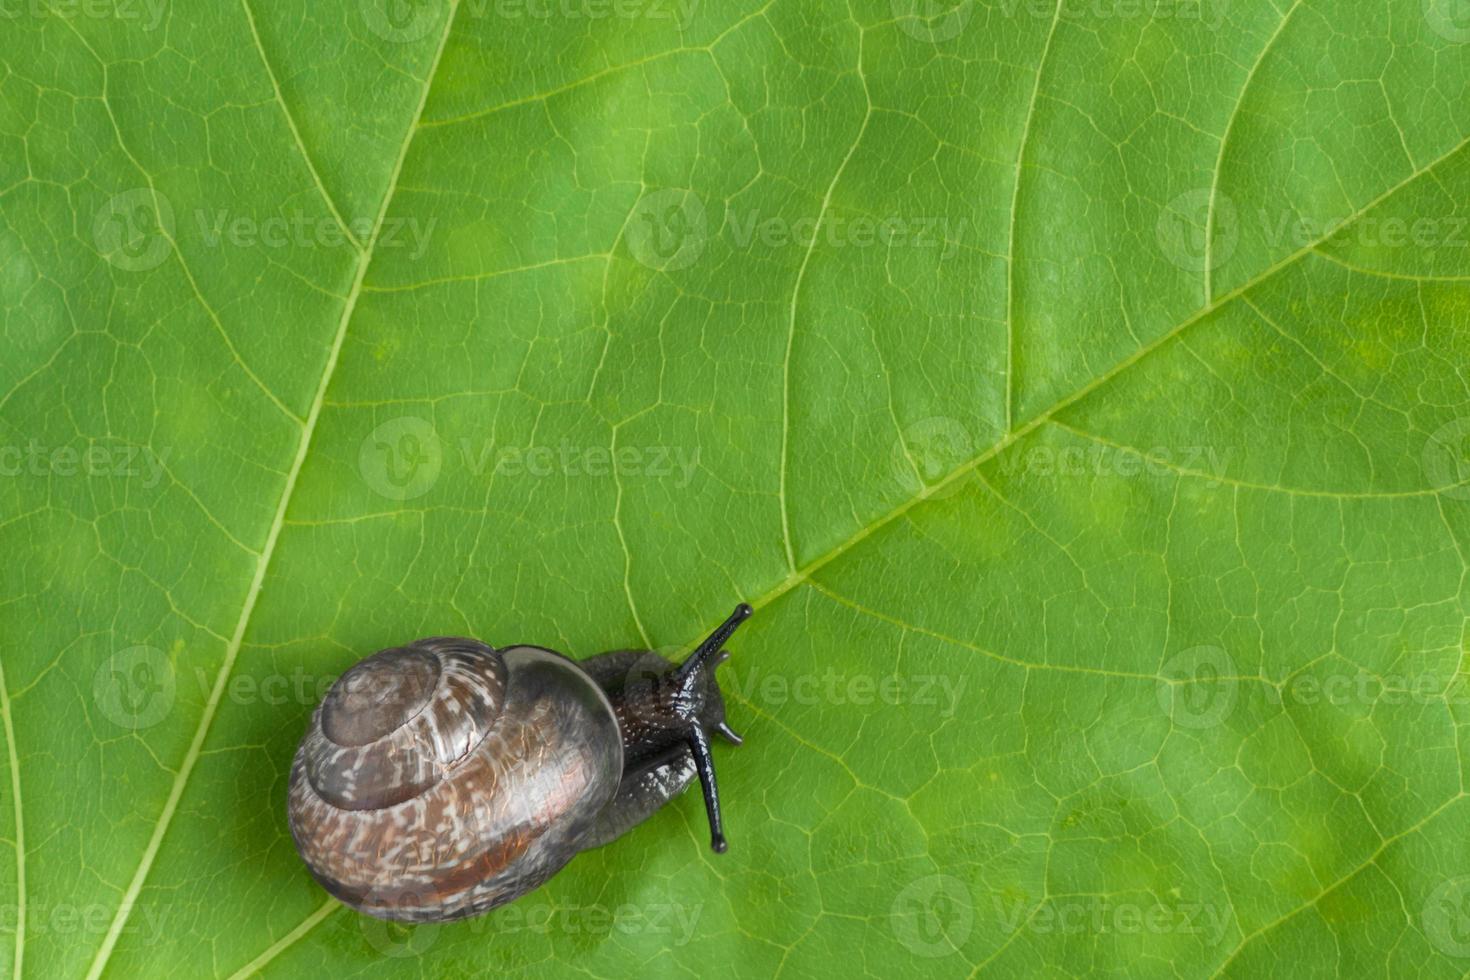 land snails on the plant, close-up photo